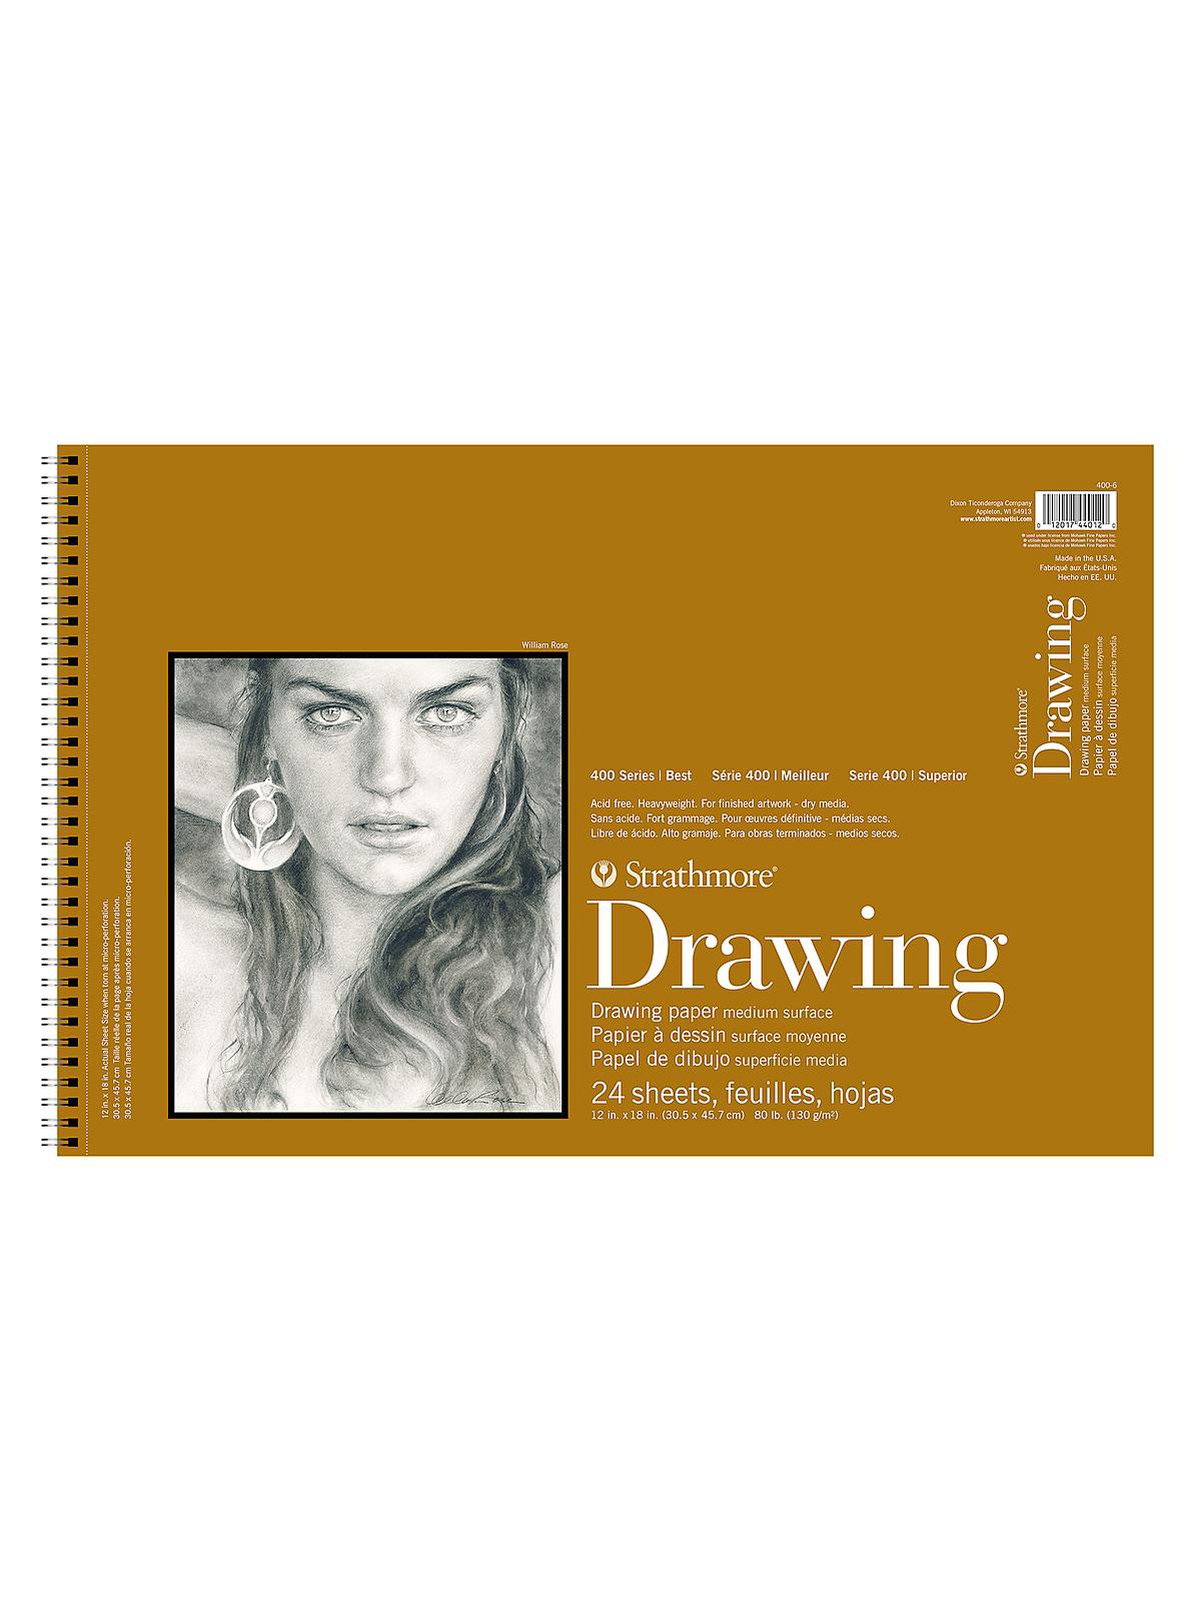 400 Series Heavyweight Drawing - Strathmore Artist Papers